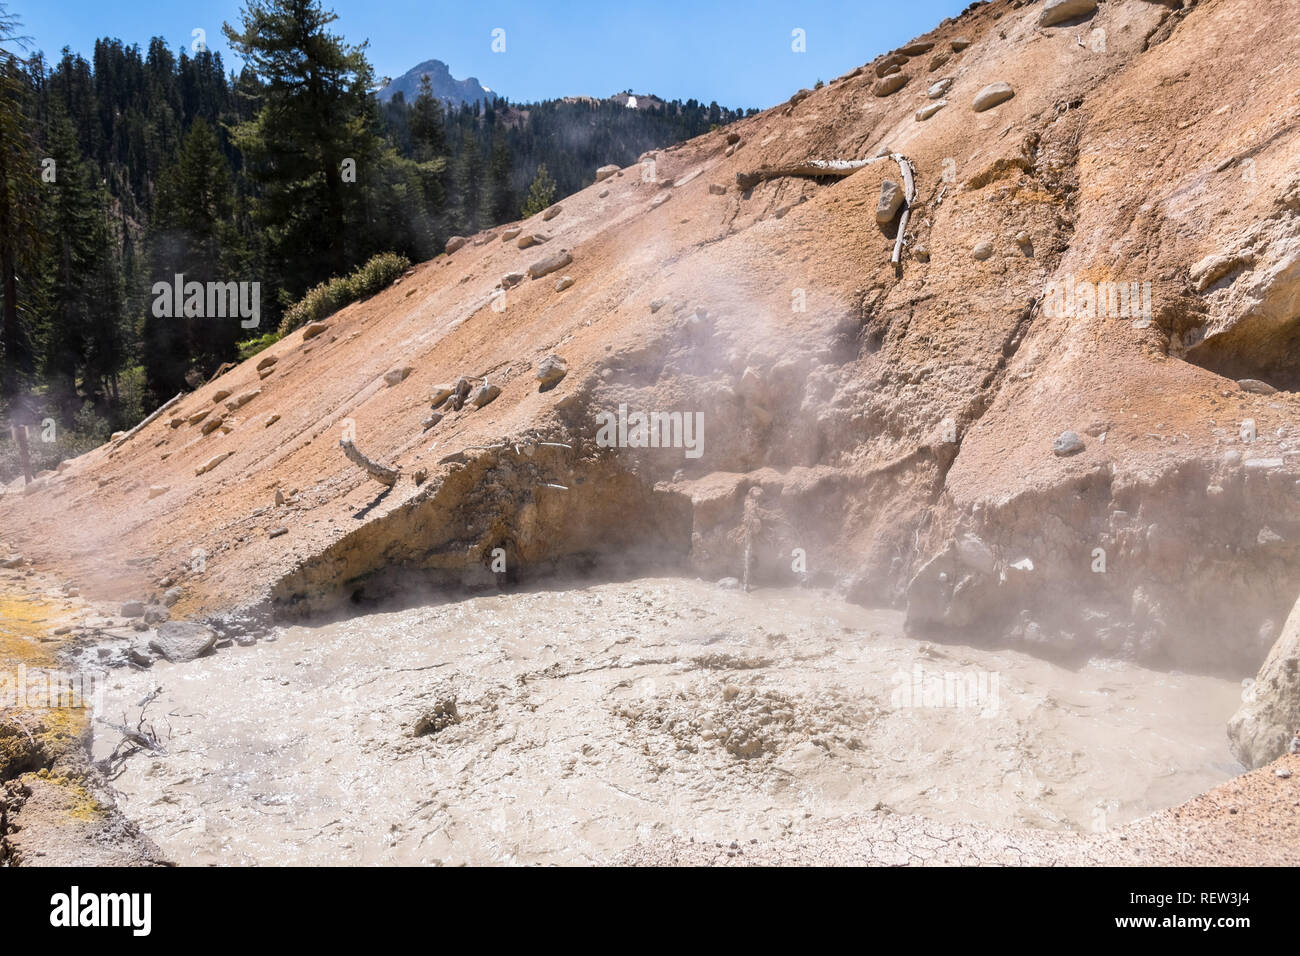 Mud volcano at the Sulphur works area in Lassen Voclanic National Park, Northern California Stock Photo